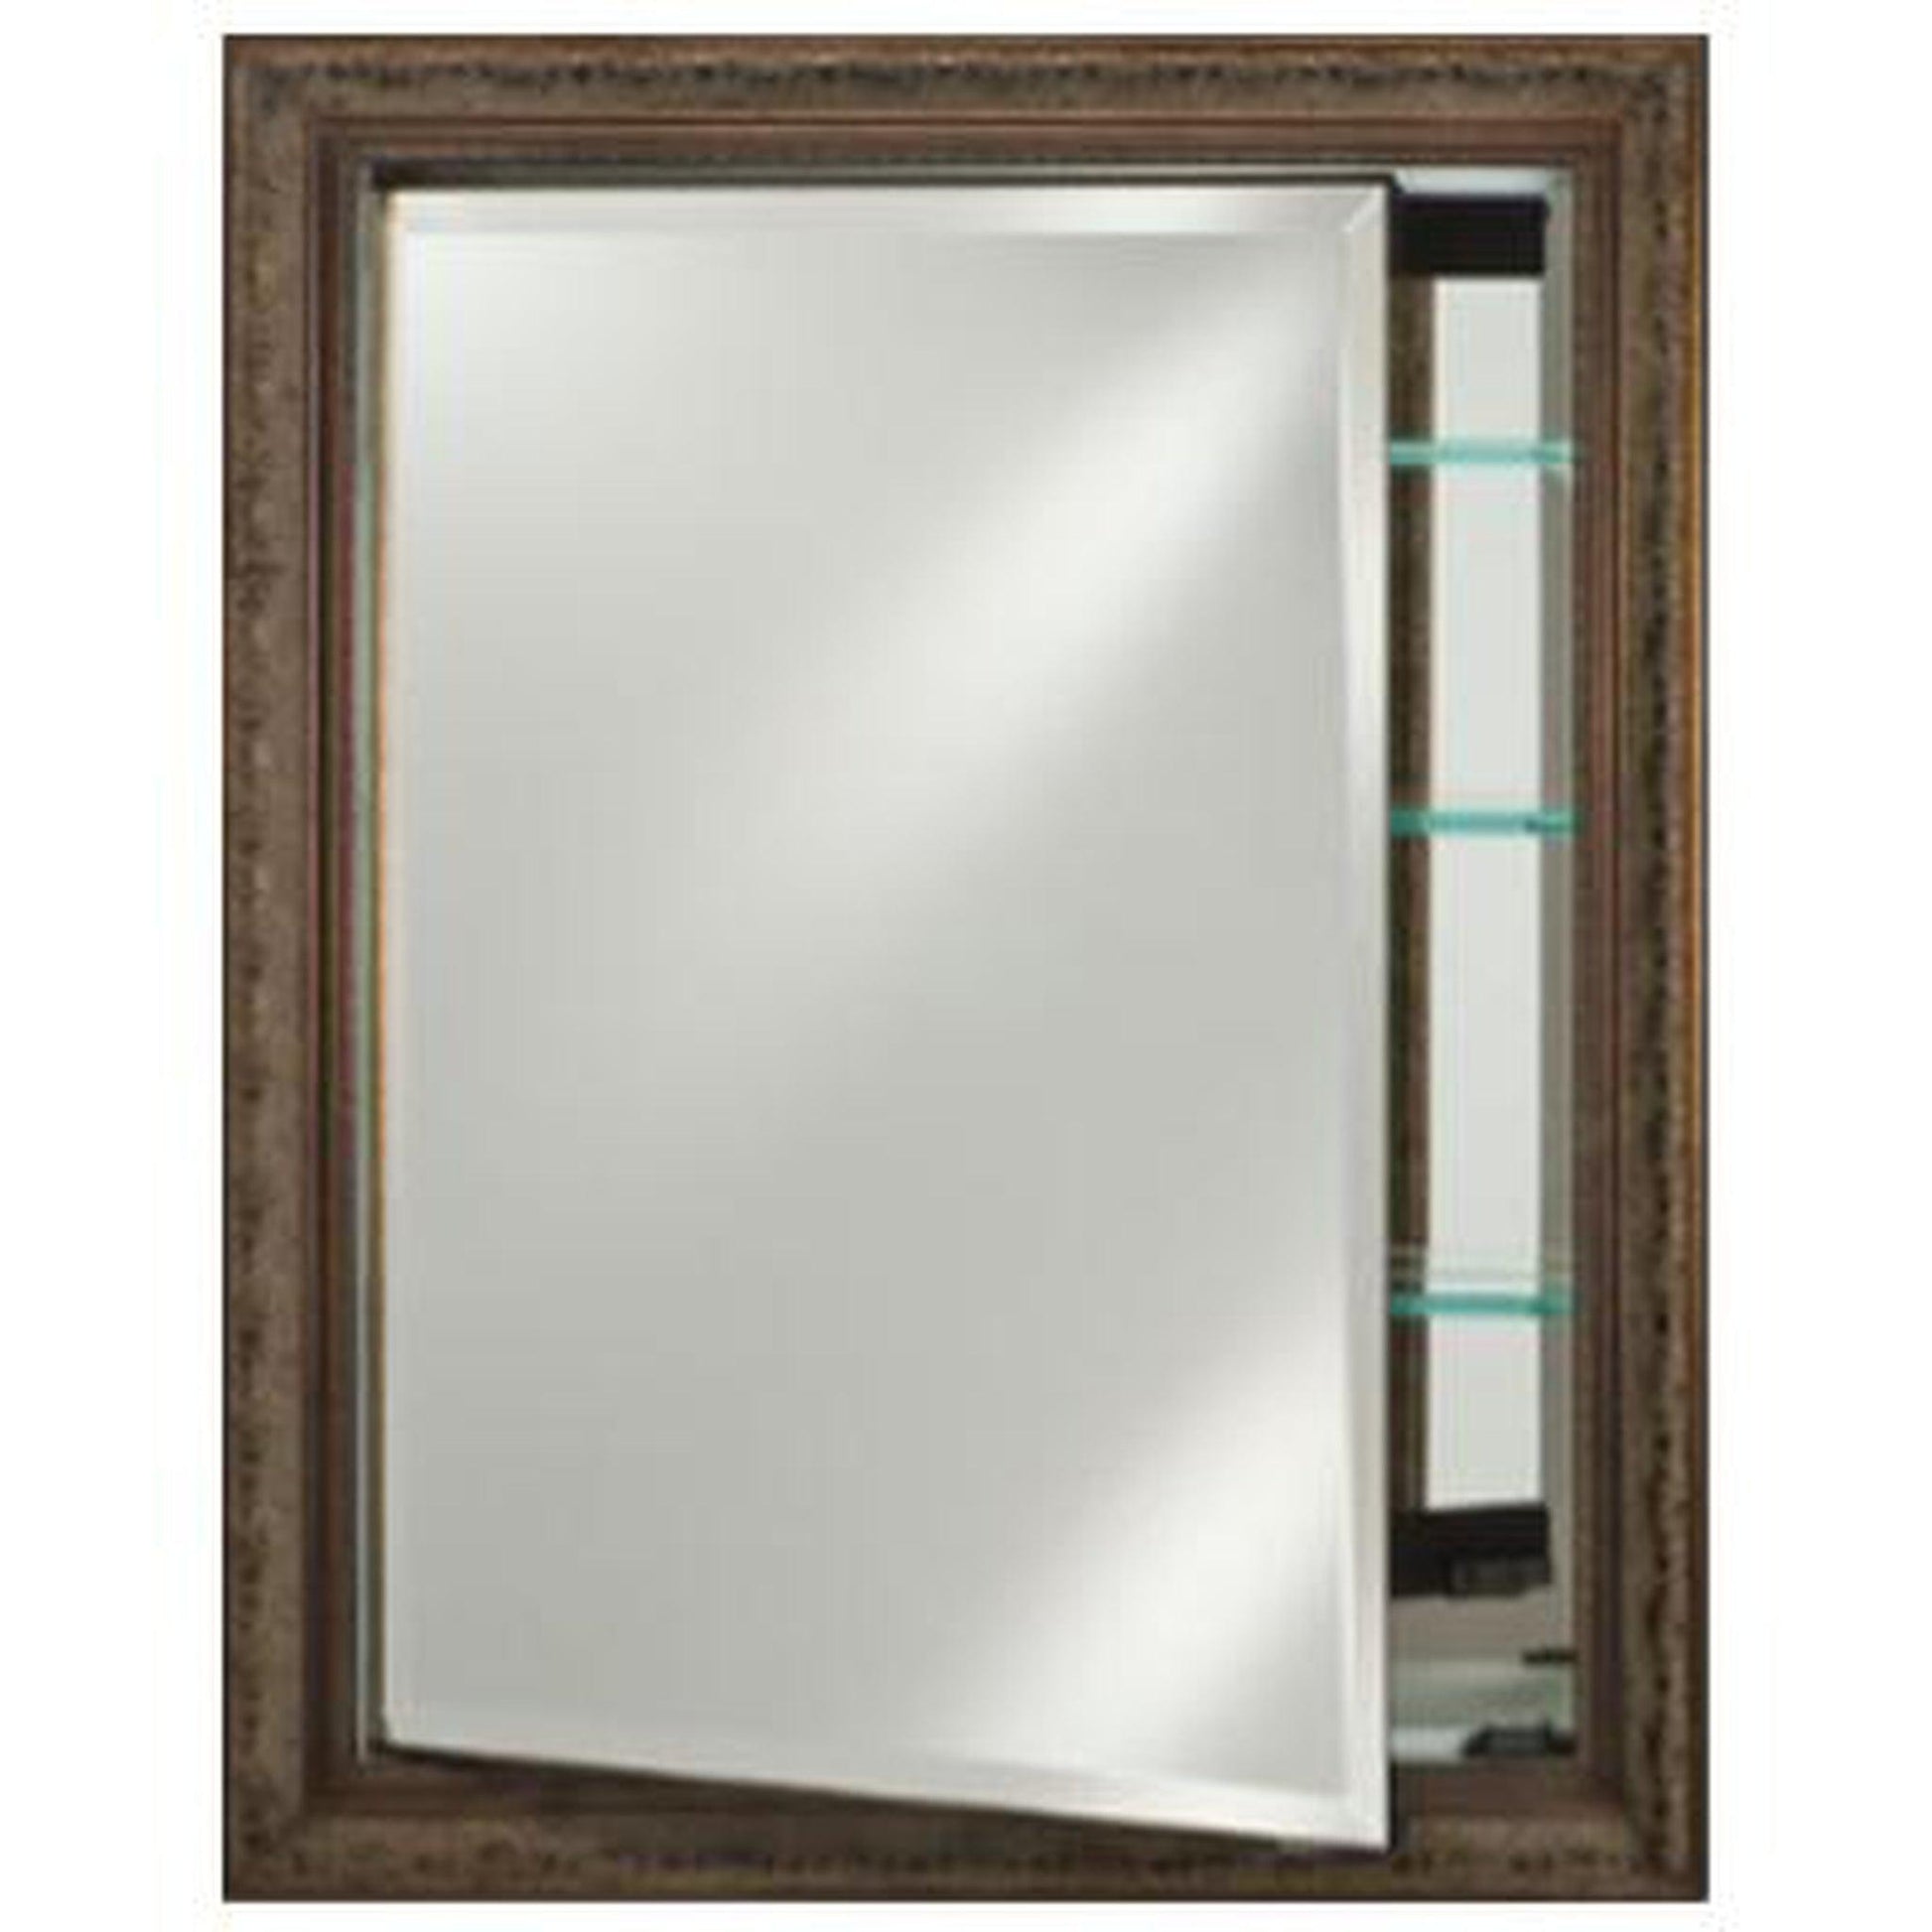 Afina Signature 24" x 36" Polished Glimmer-Scallop Recessed Reversible Hinged Single Door Medicine Cabinet With Beveled Edge Mirror